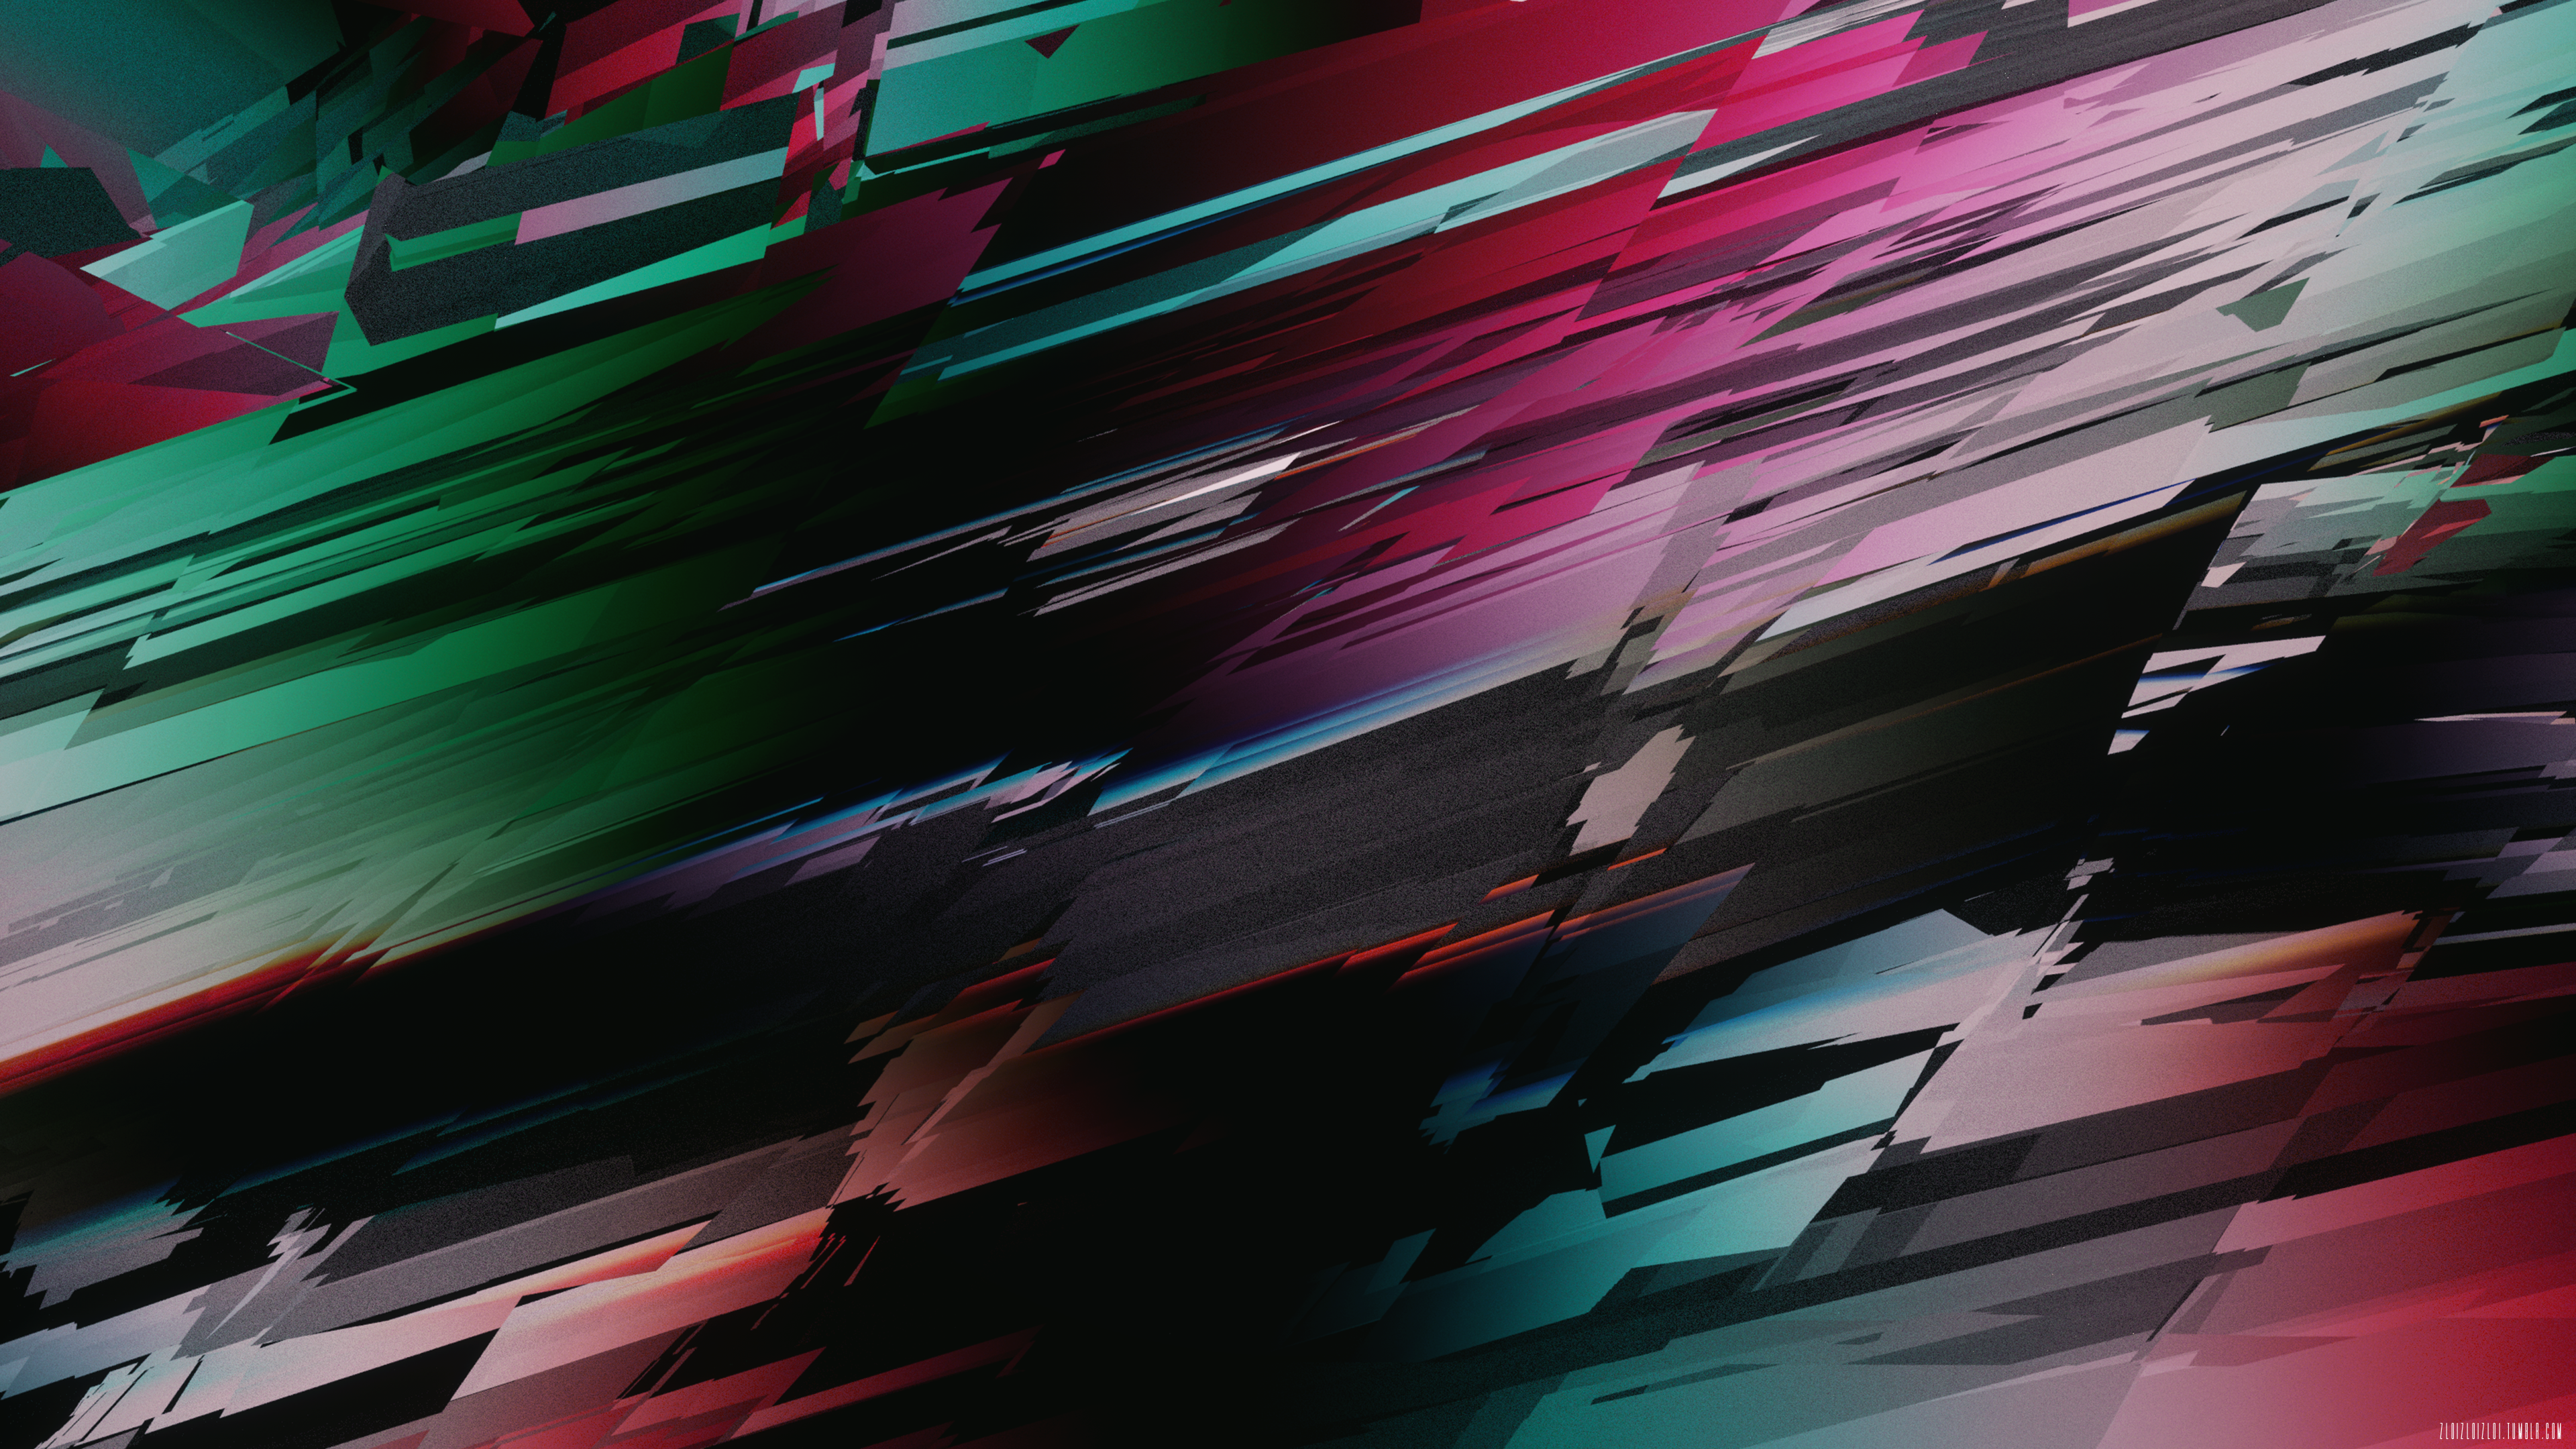 General 3840x2160 glitch art abstract 3D Abstract Cinema 4D watermarked digital art